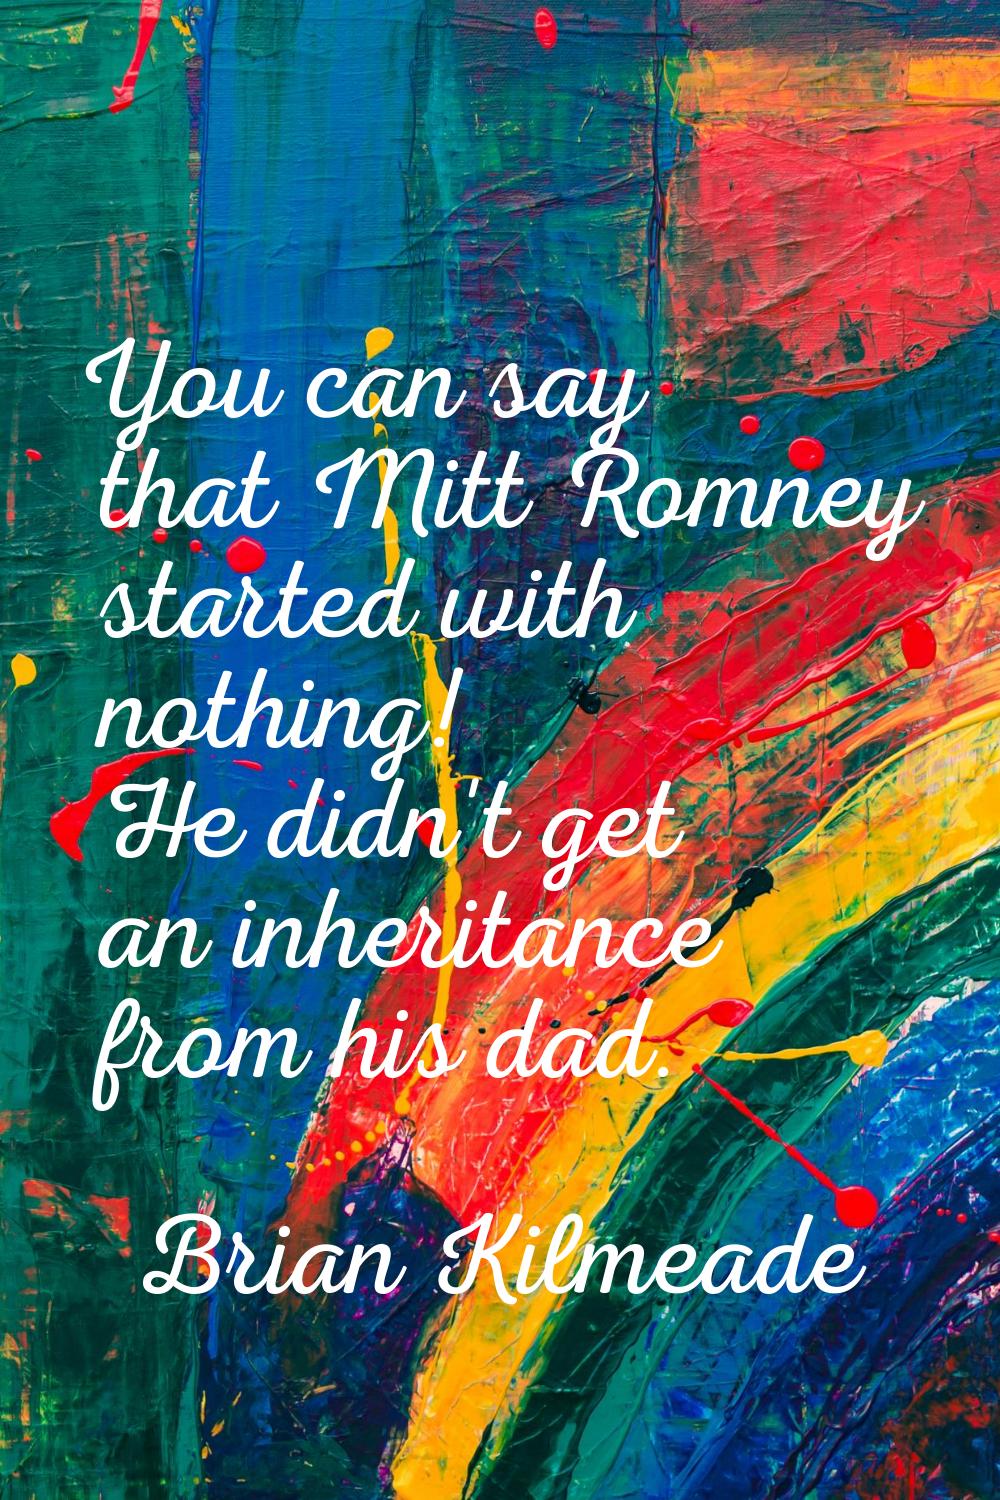 You can say that Mitt Romney started with nothing! He didn't get an inheritance from his dad.